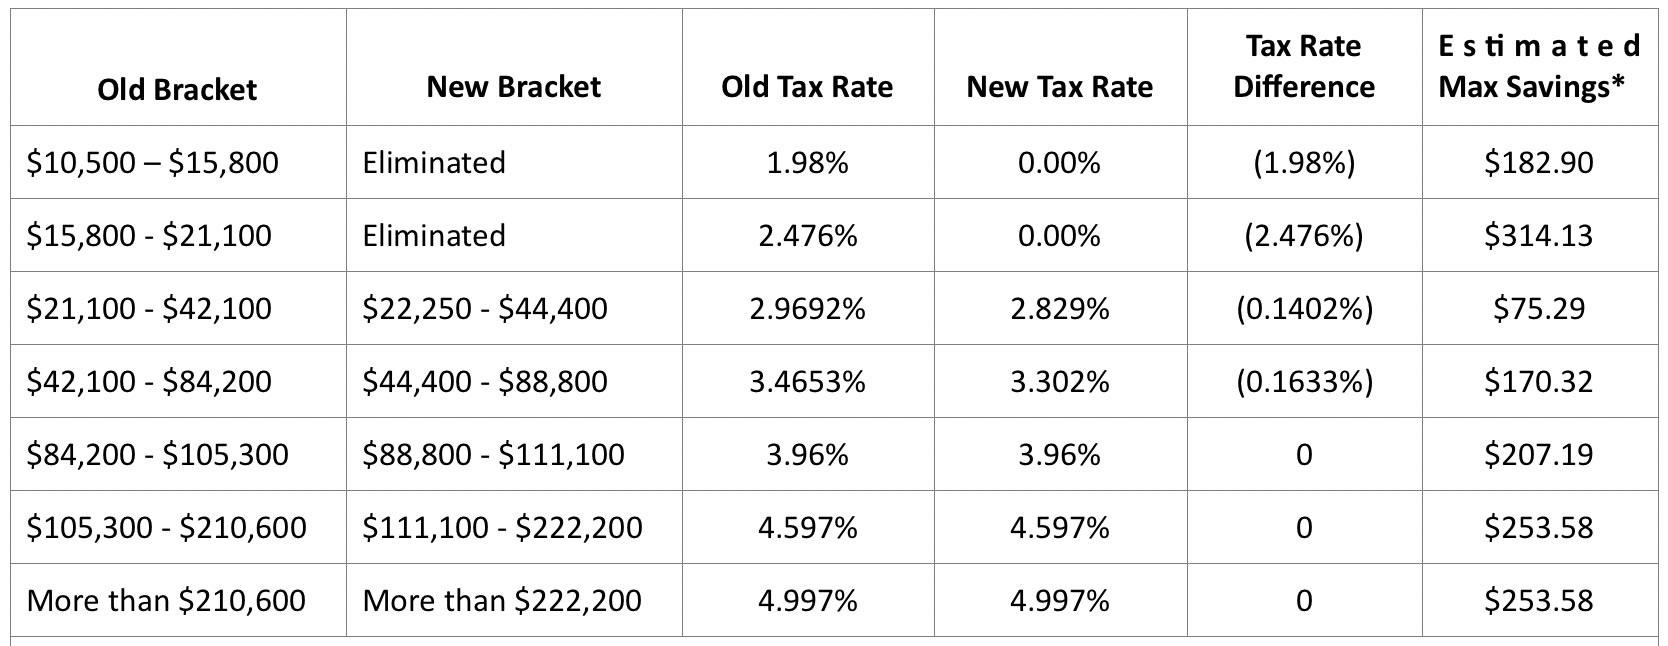 Ohio Proposes Higher Taxes table